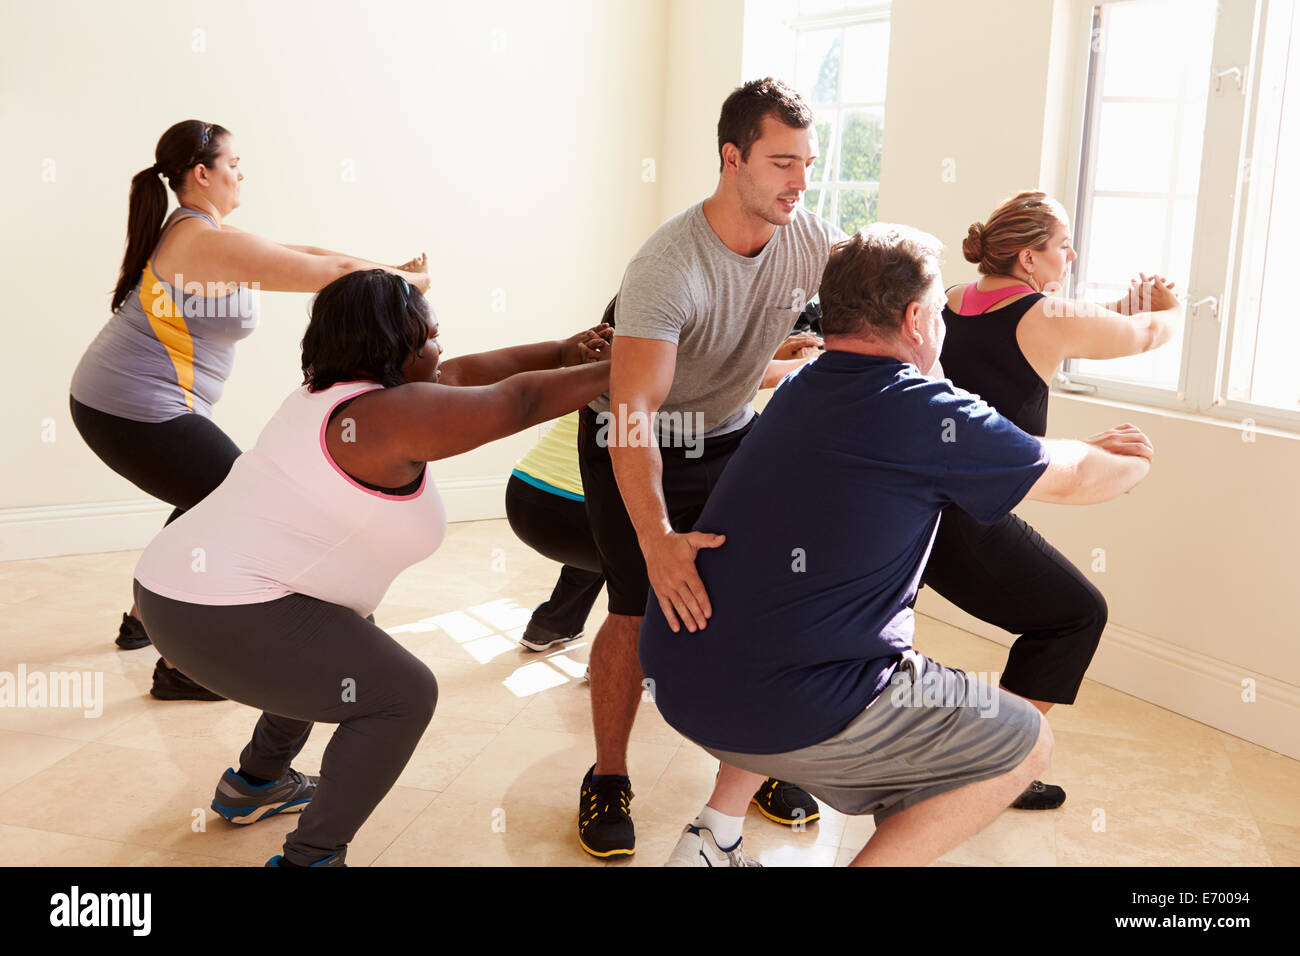 Fitness Instructor In Exercise Class For Overweight People Stock Photo